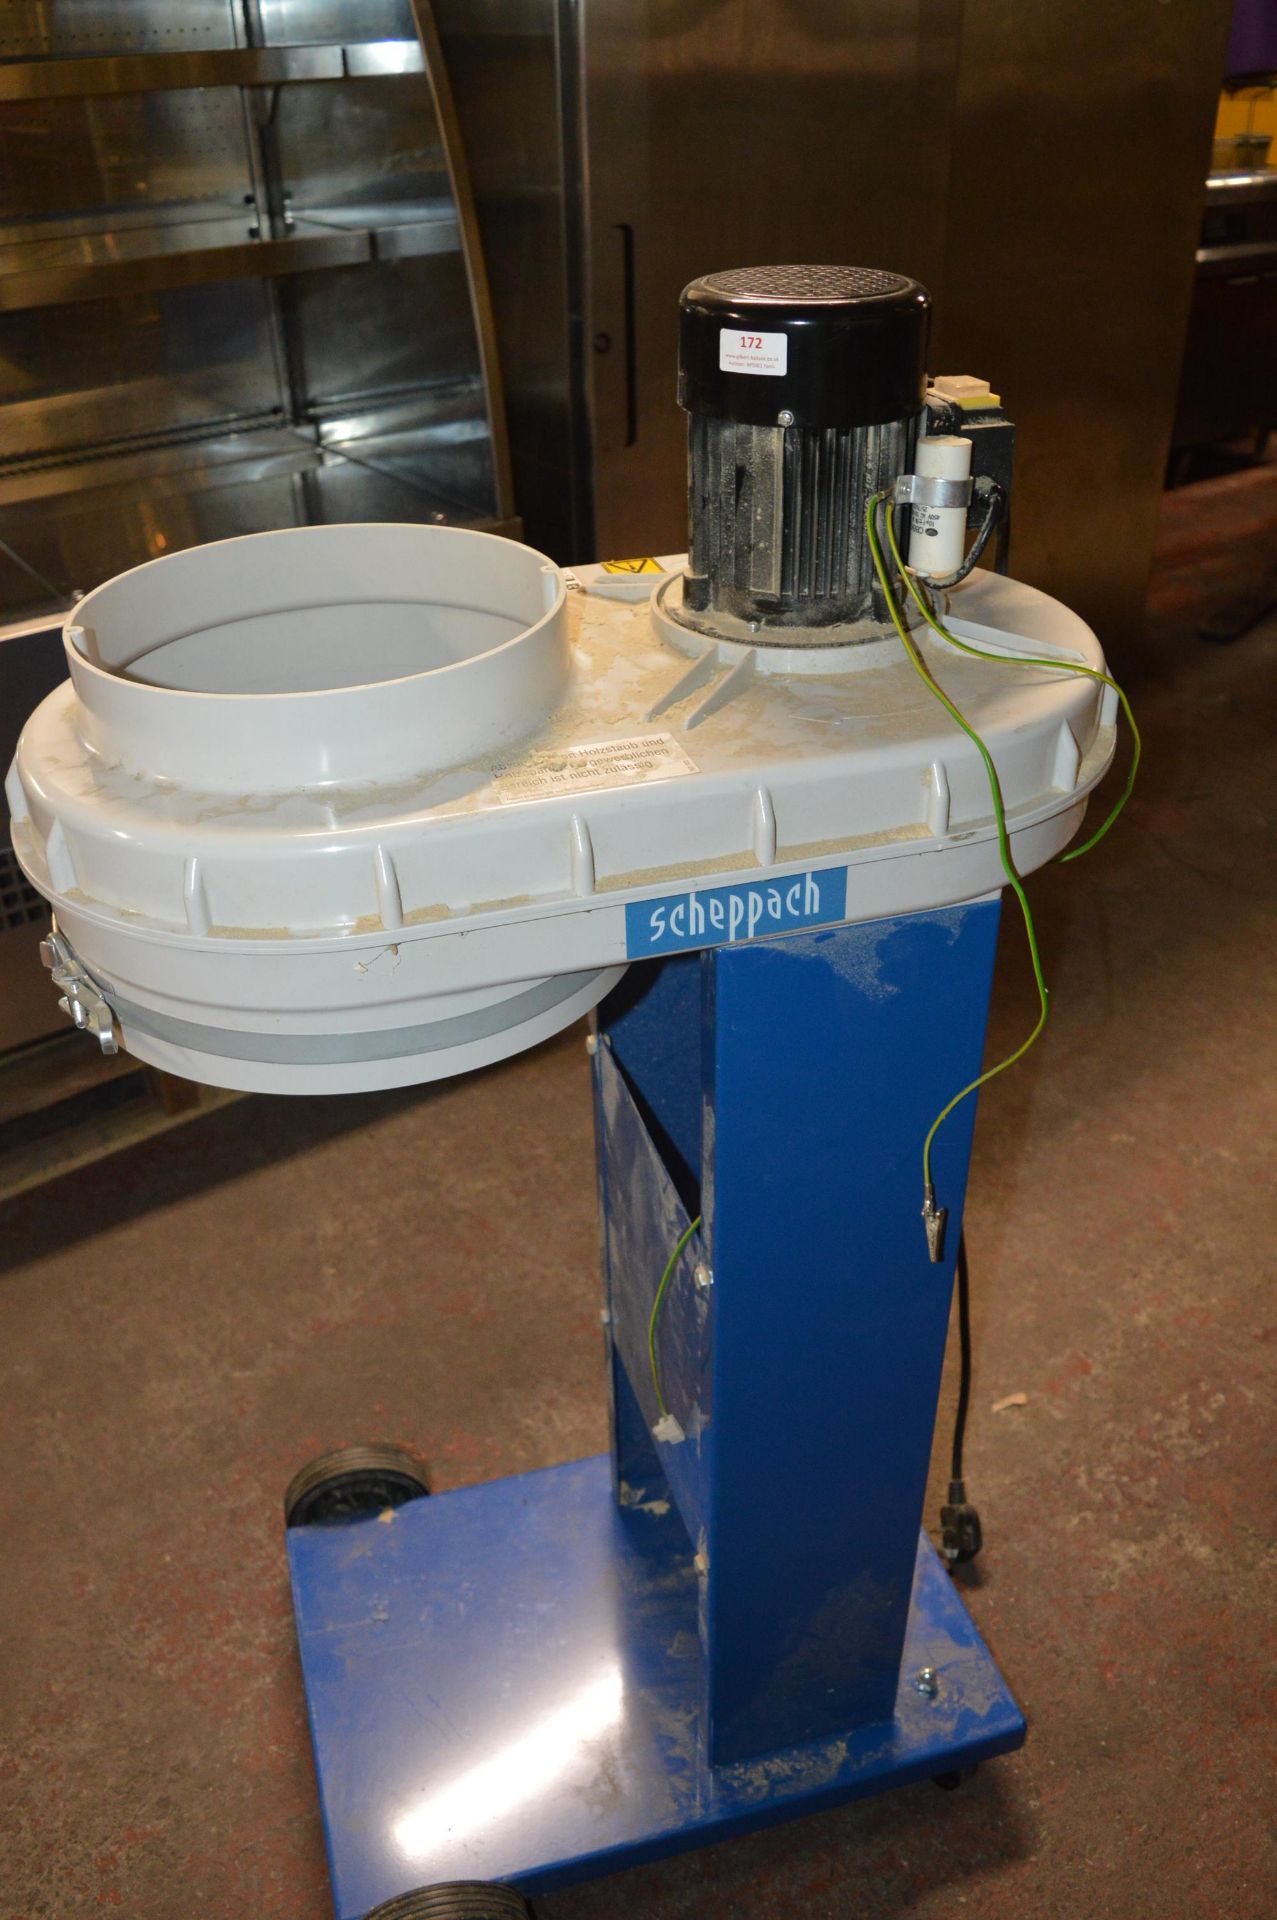 *Sheppach Dust Extractor 240v